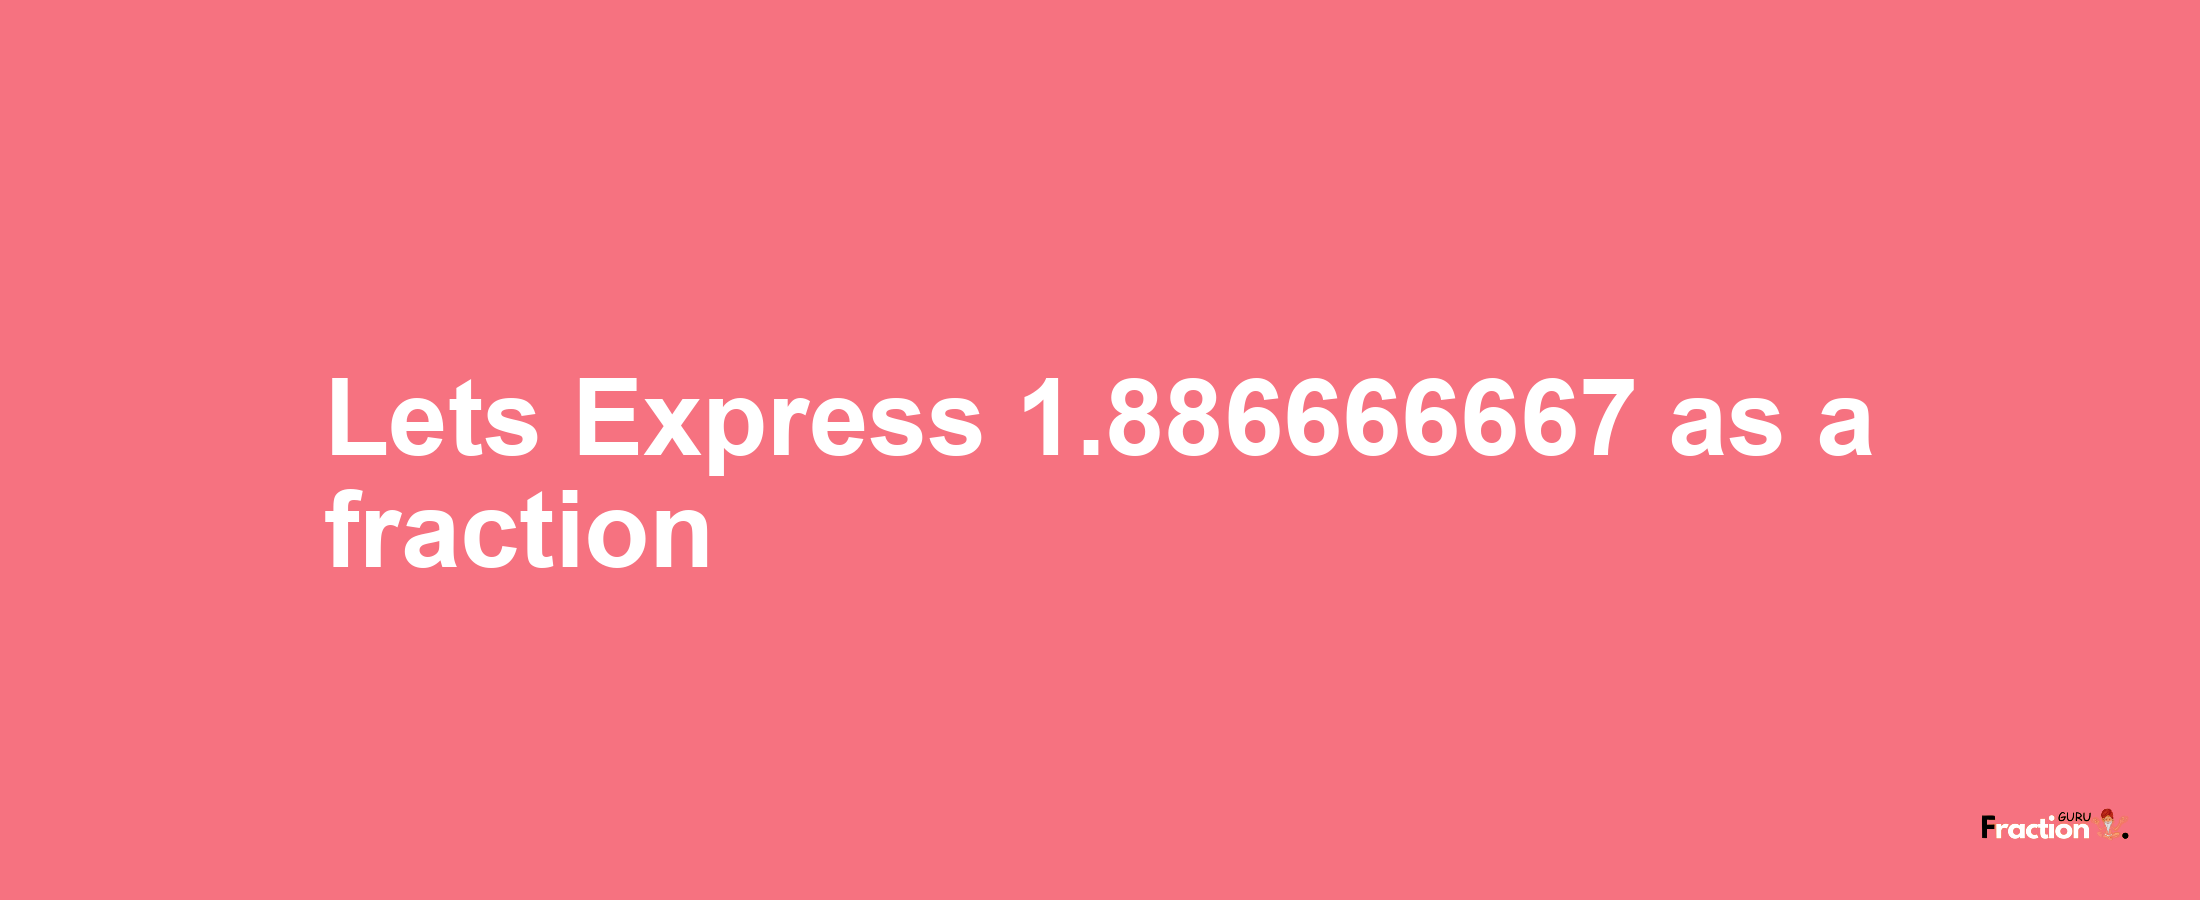 Lets Express 1.886666667 as afraction